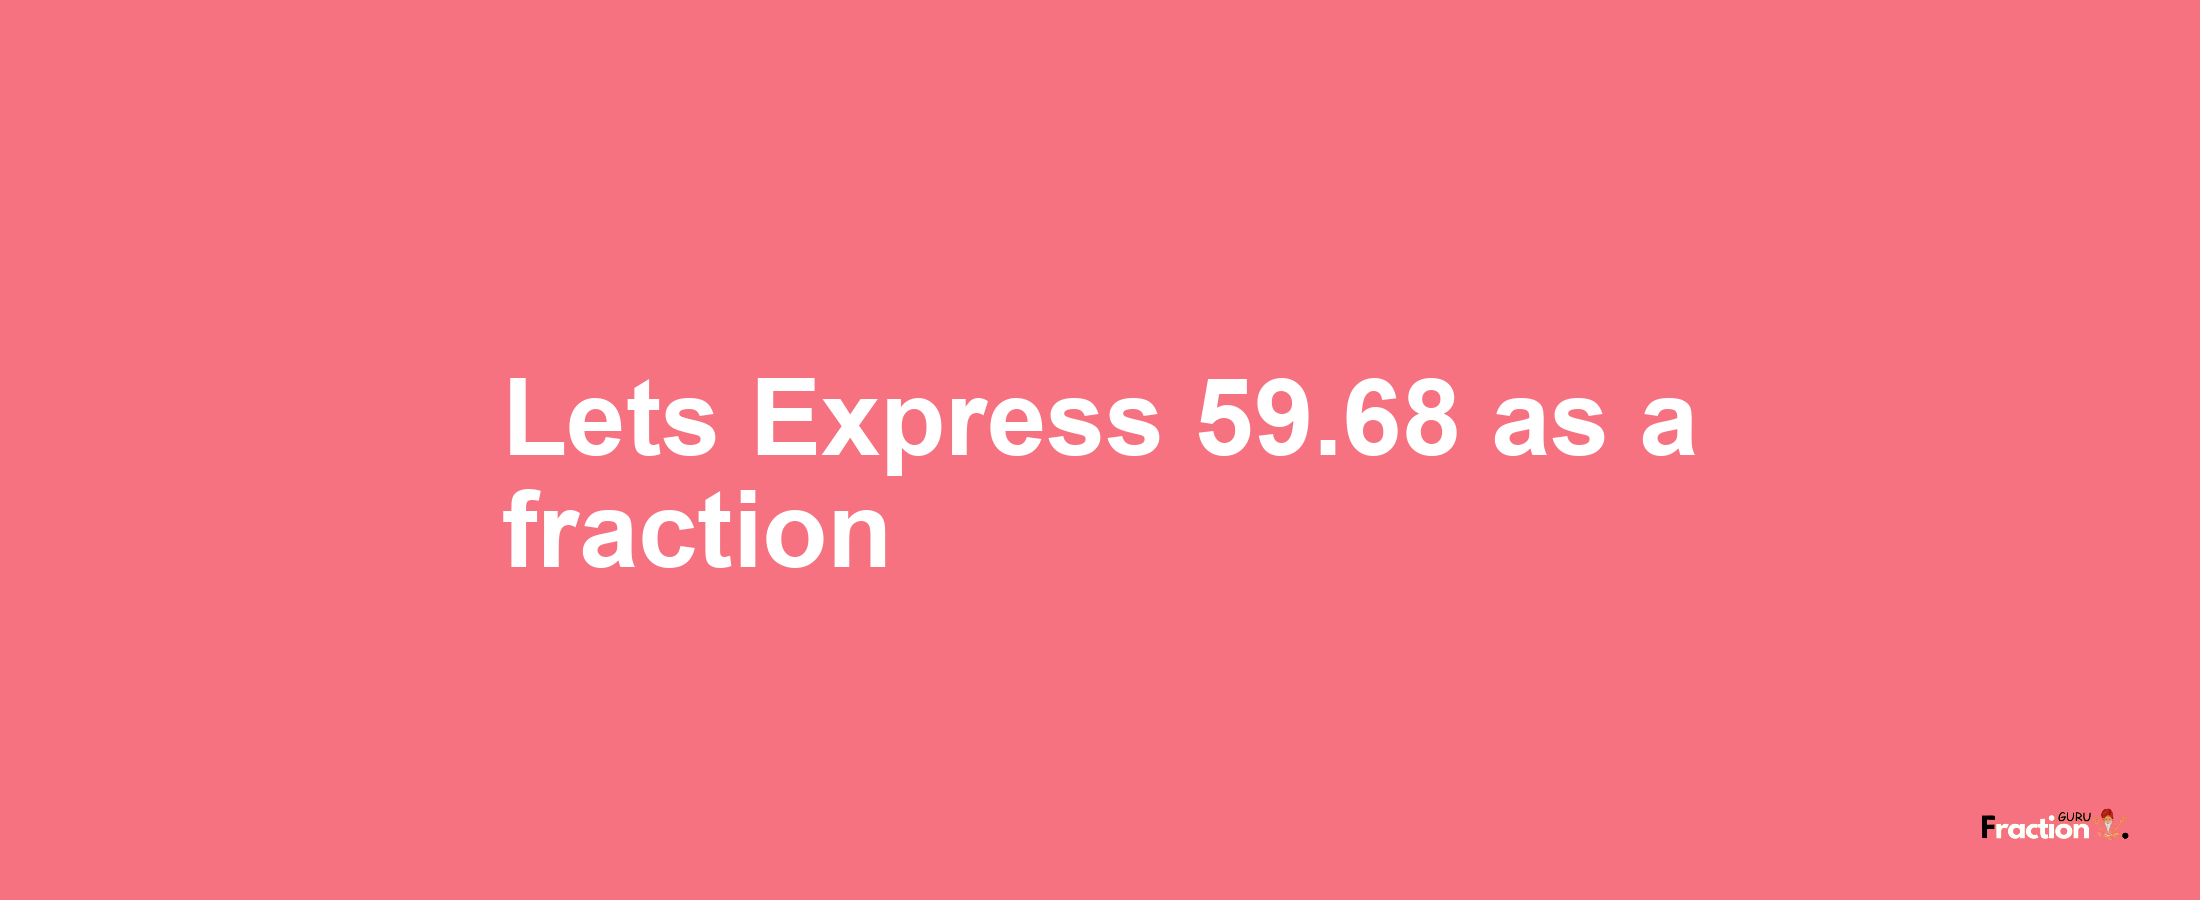 Lets Express 59.68 as afraction